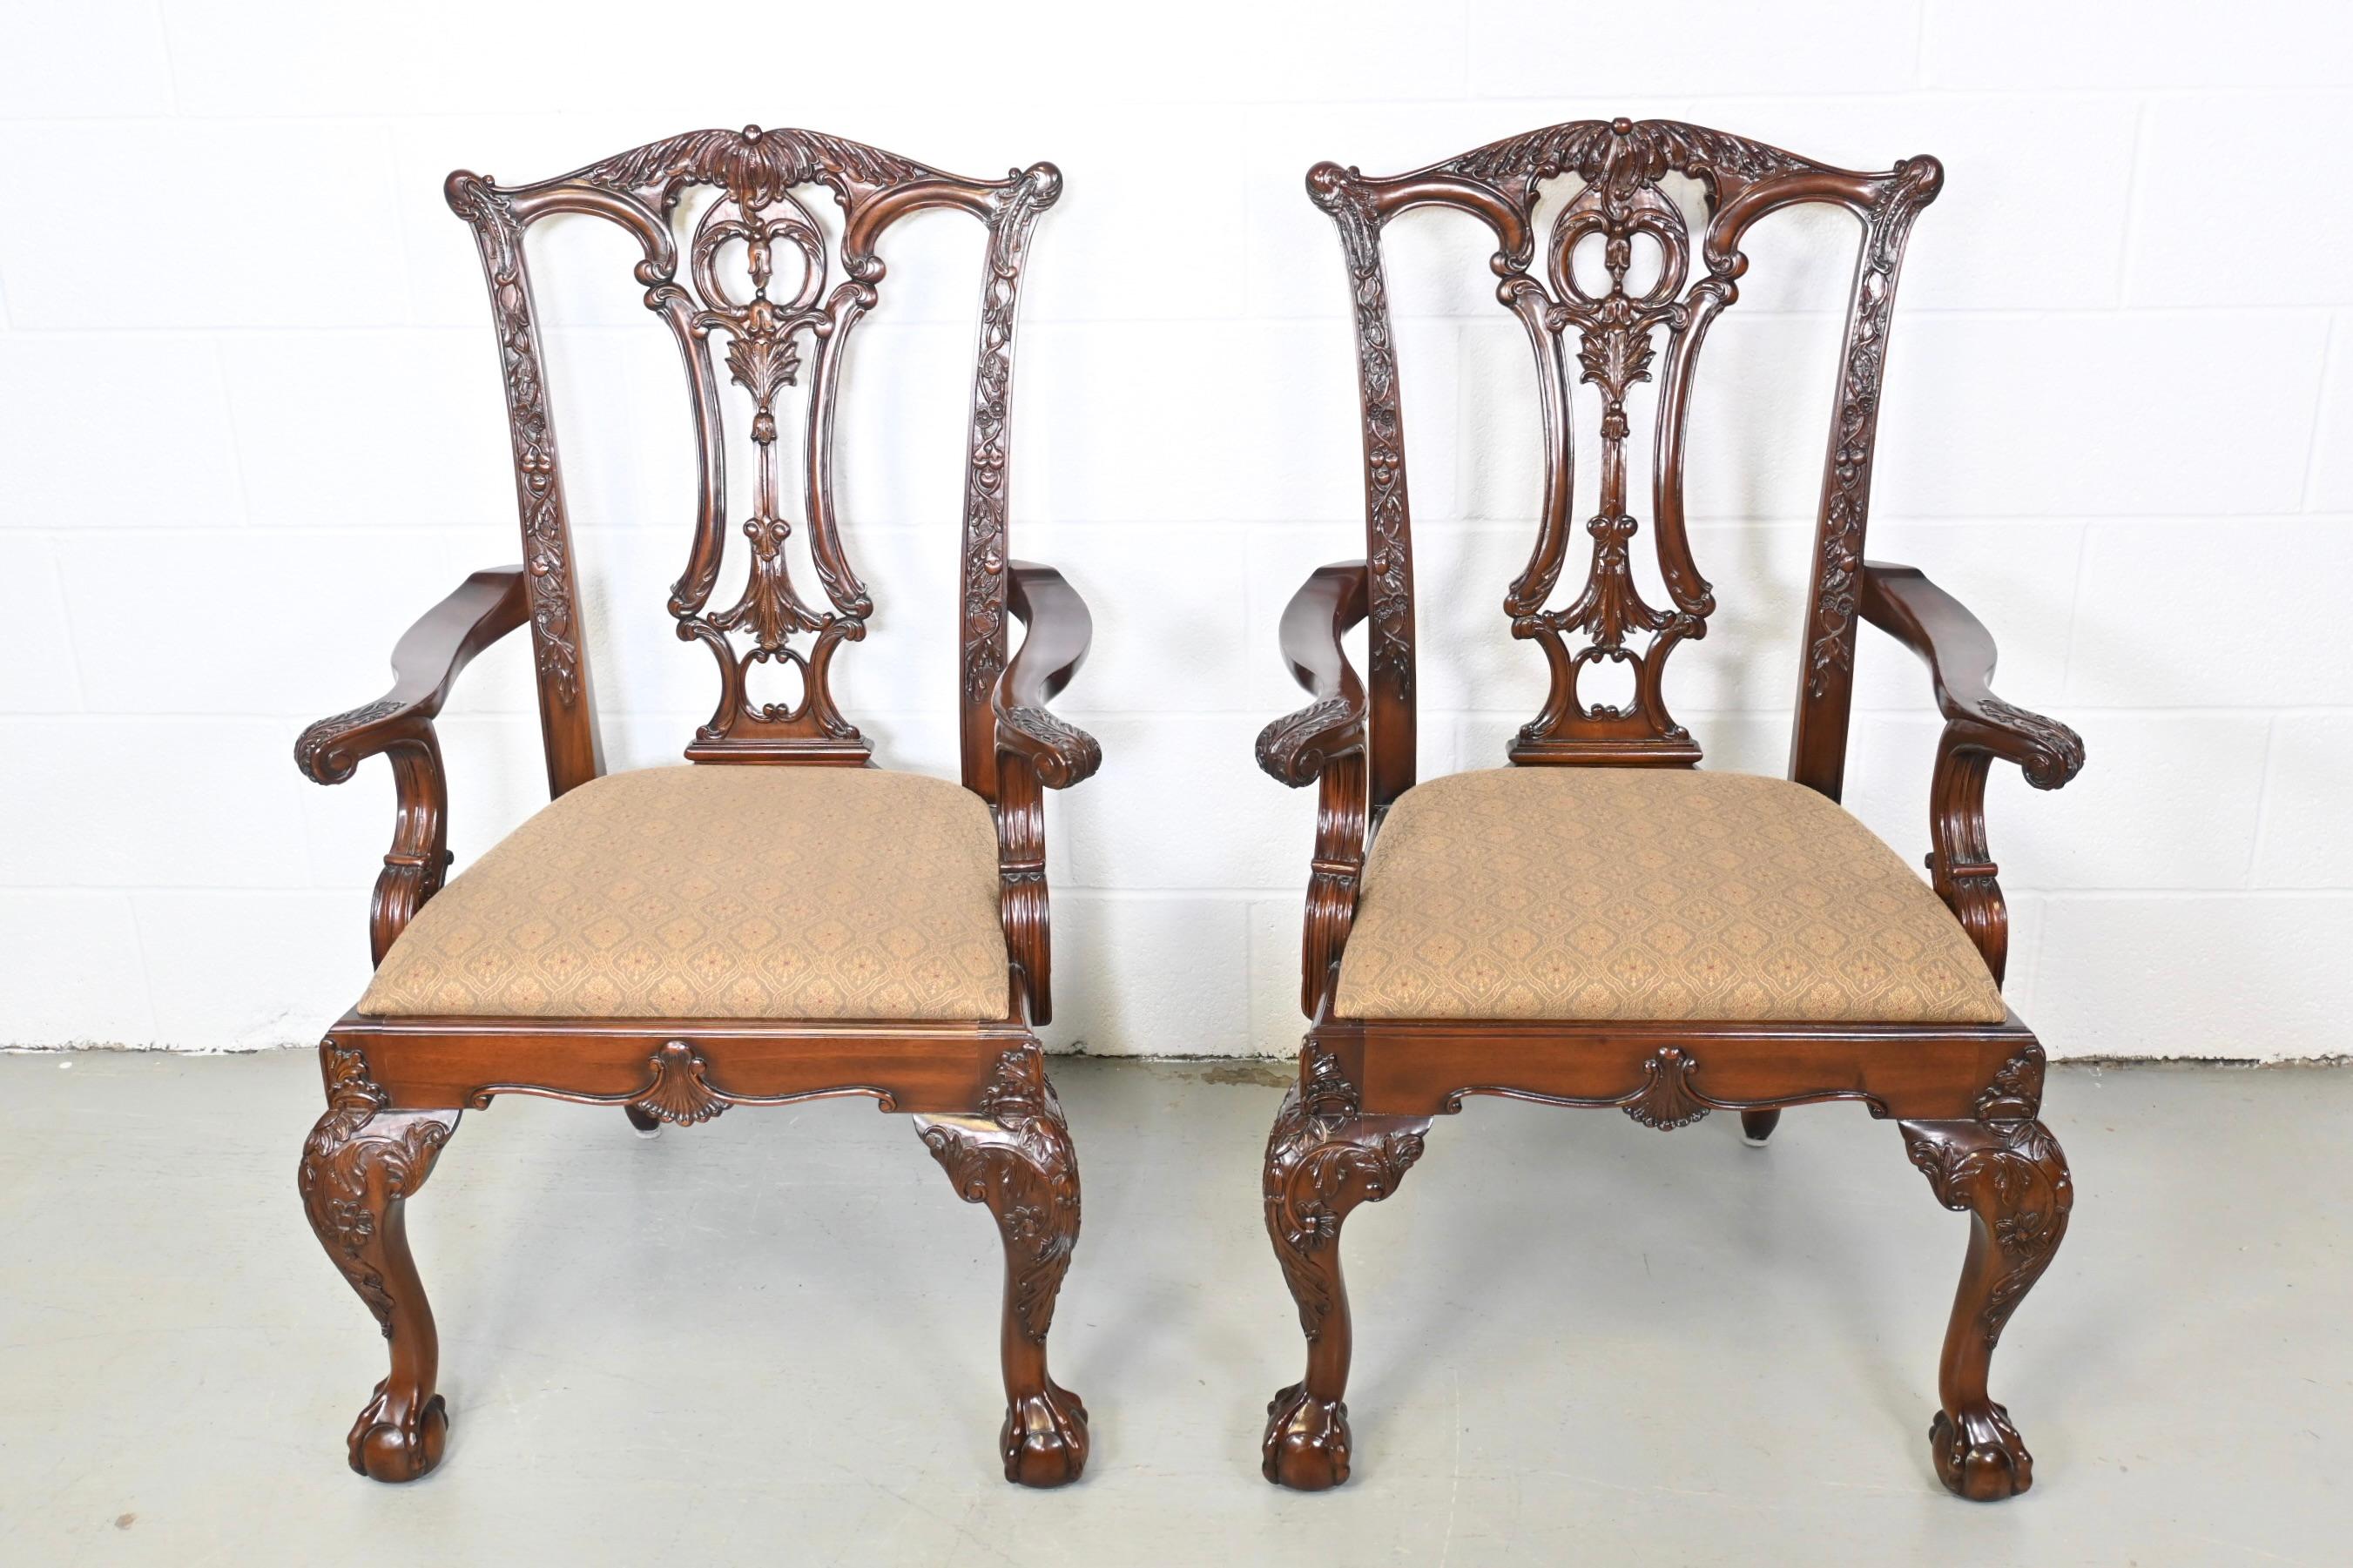 Contemporary Drexel Heritage French Chippendale Arm Chairs - a Pair